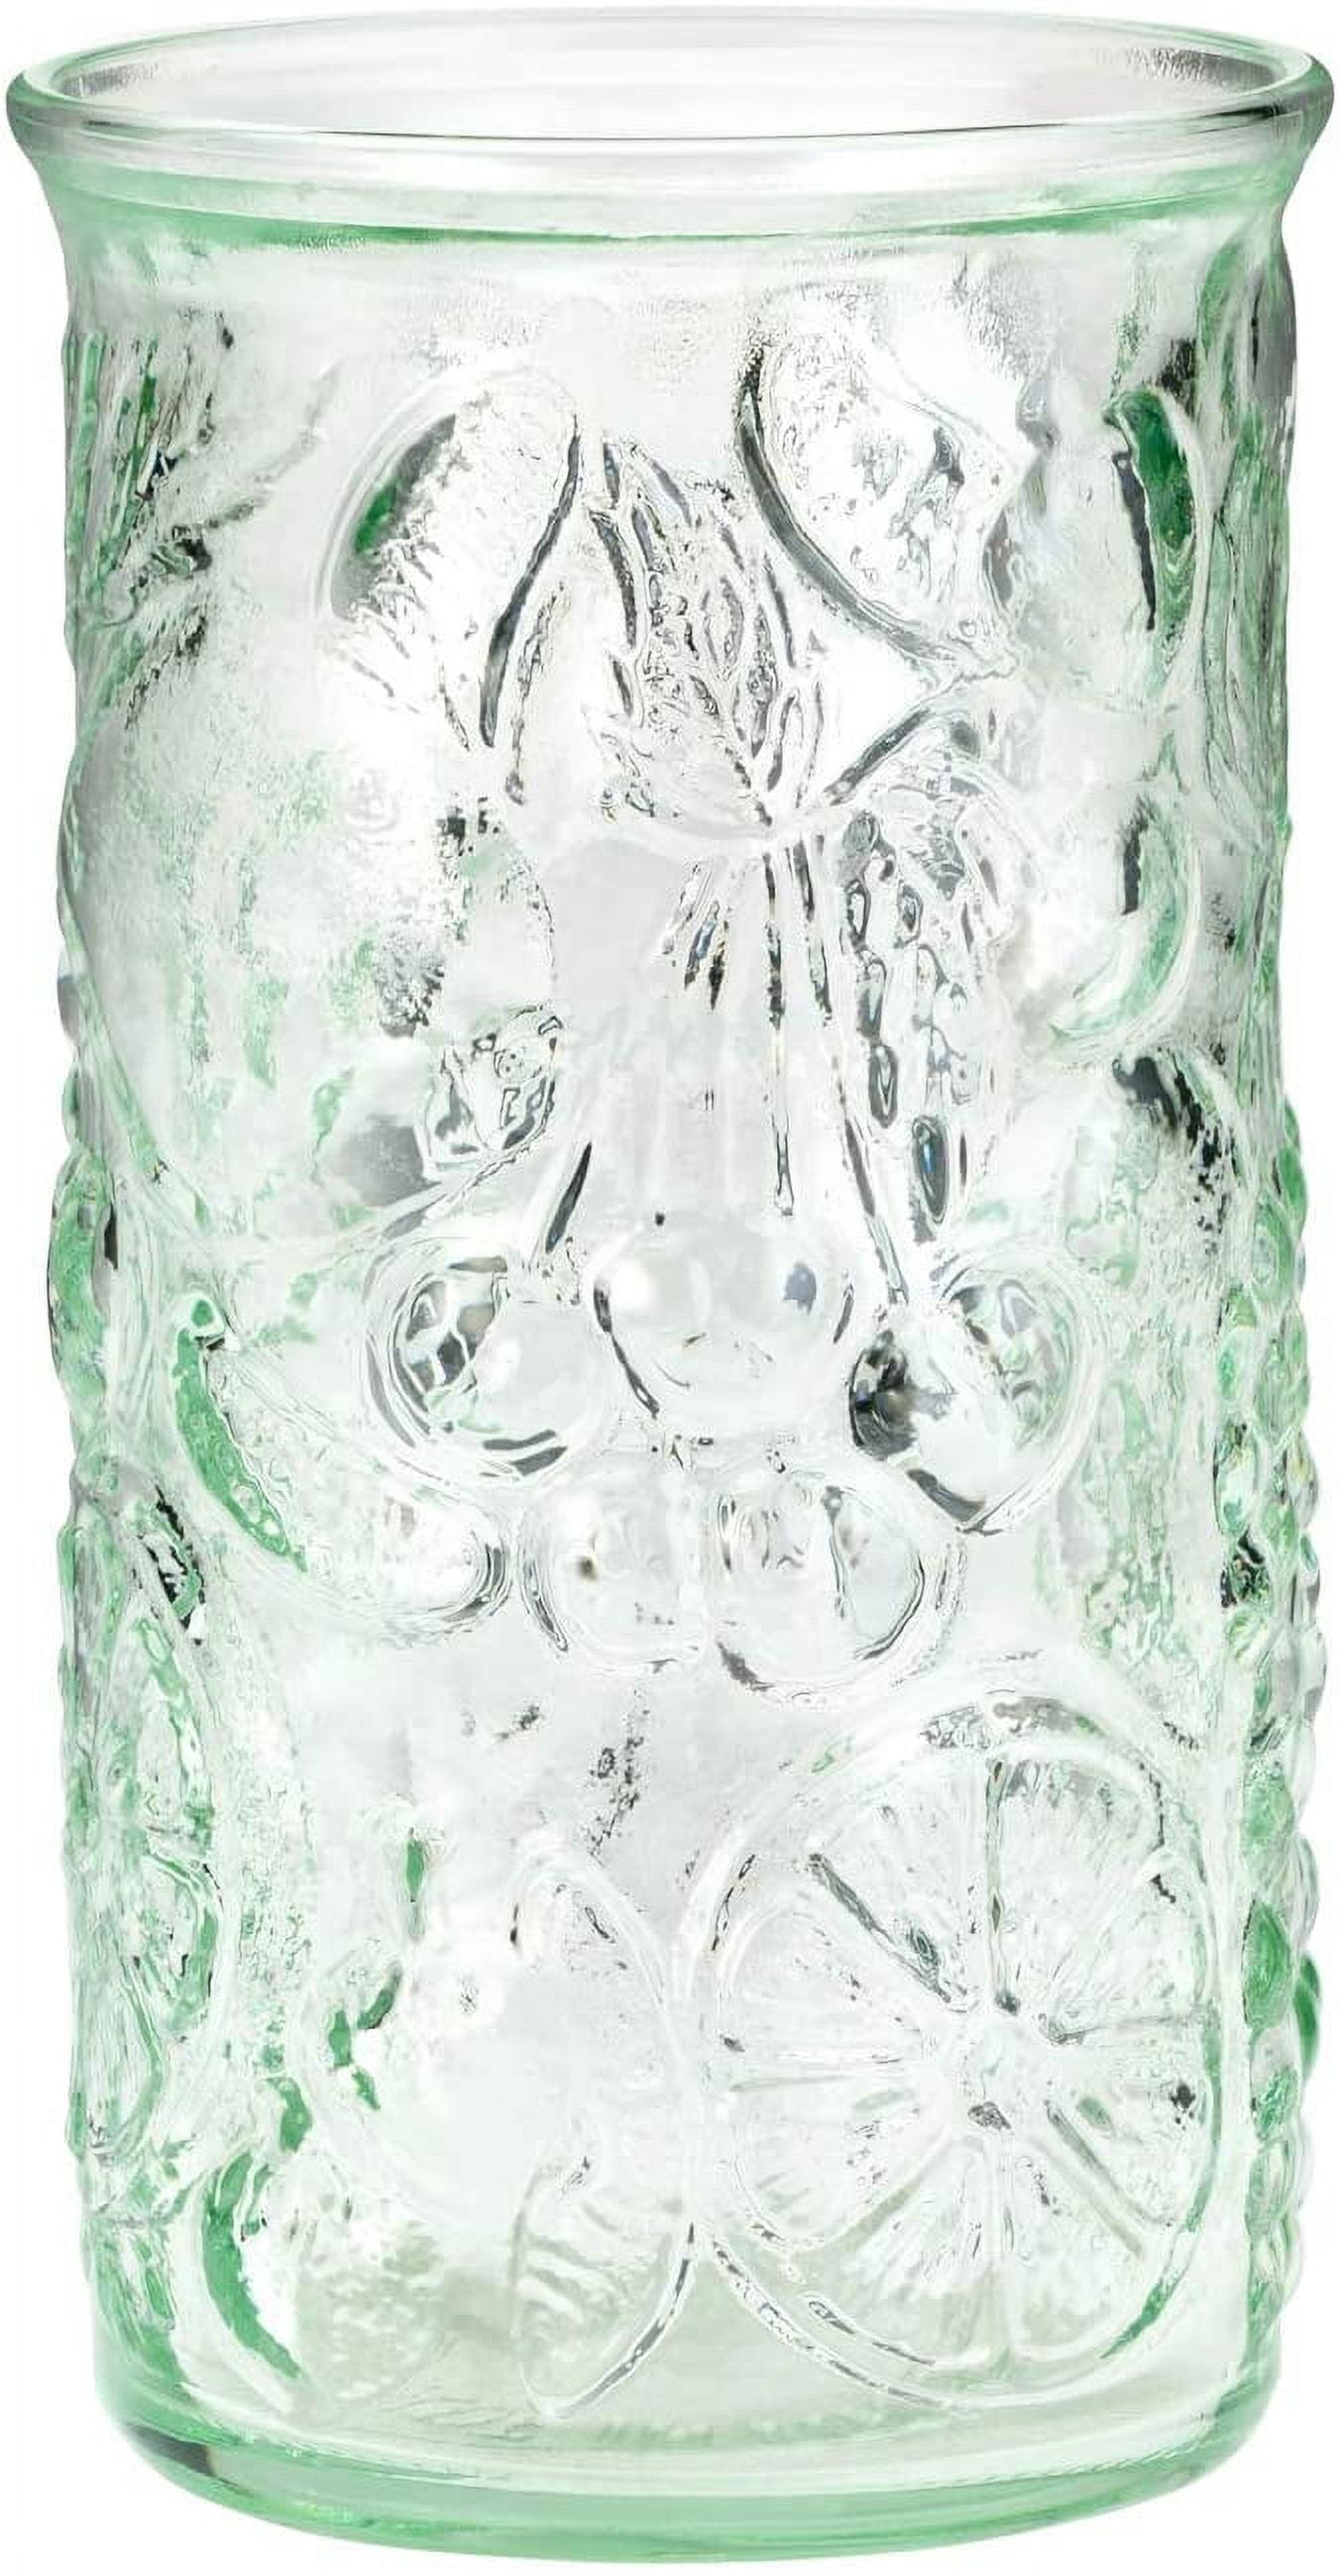 Amici Home Bee Hiball Glass | 16 Oz | Italian Made, Recycled Glass with  Green Tint | Drinking Glass …See more Amici Home Bee Hiball Glass | 16 Oz 